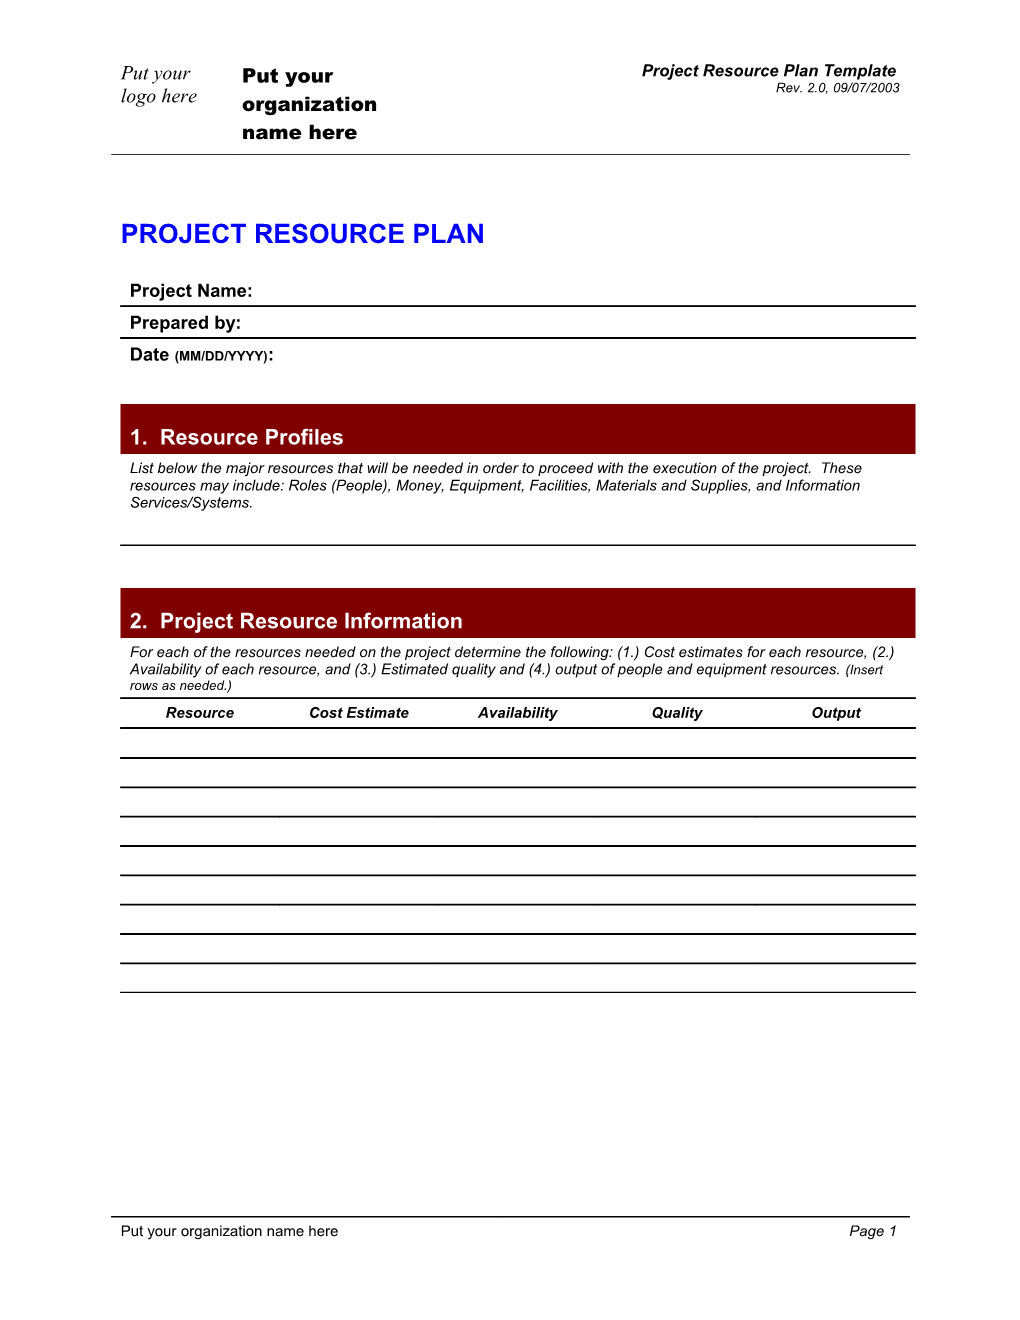 Project Resource Plan Template